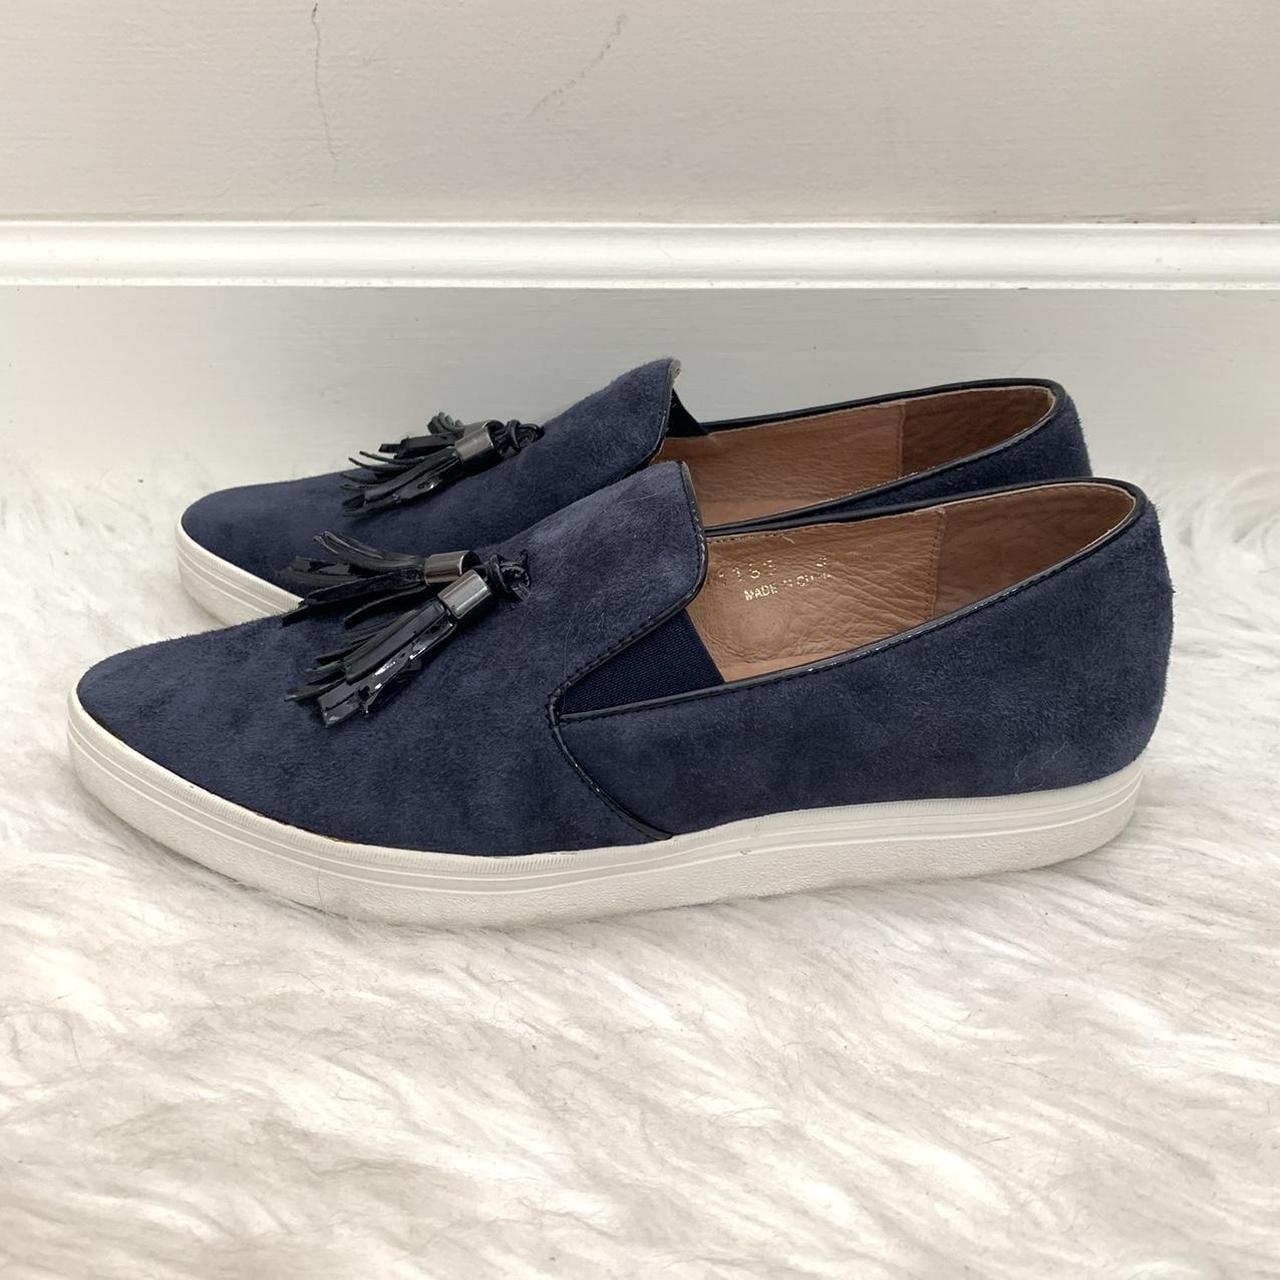 All Black Women's Blue and Navy Loafers (2)